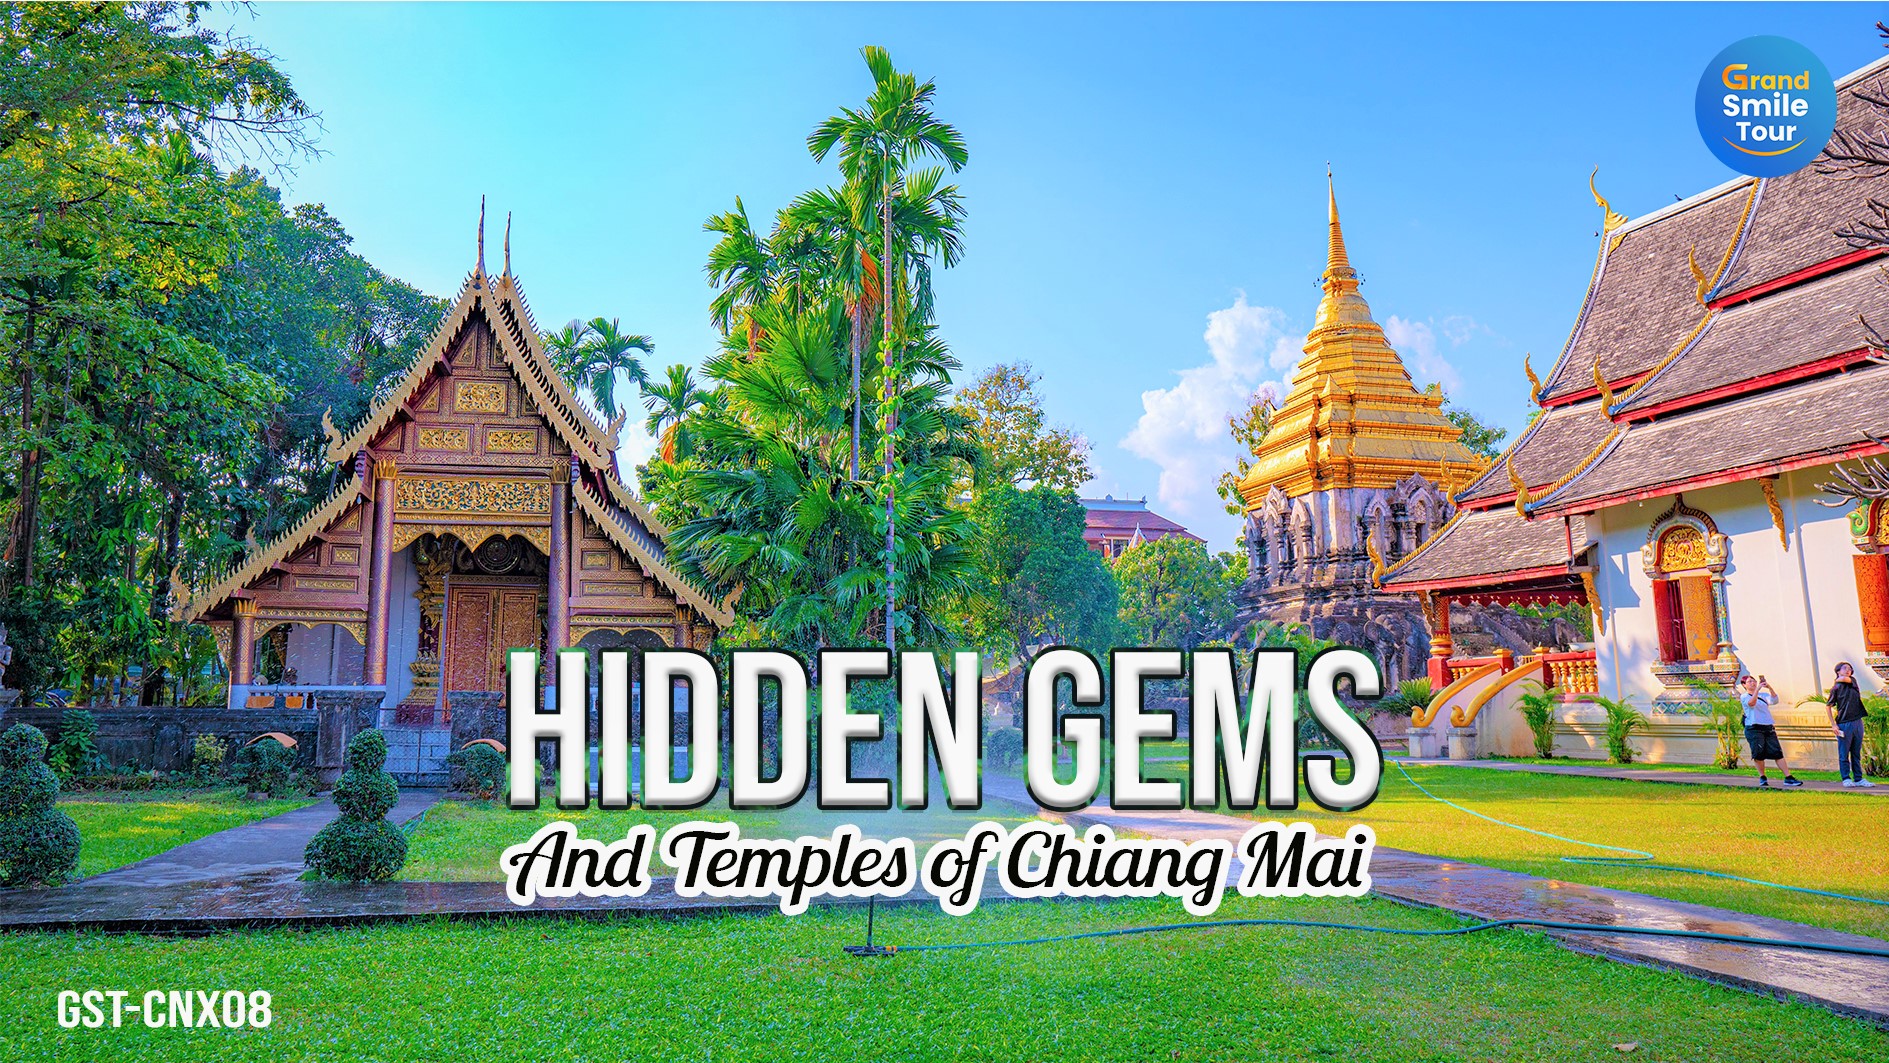 GST-CNX08 Half Day Tour - Hidden Gems and Temple of Chiang Mai